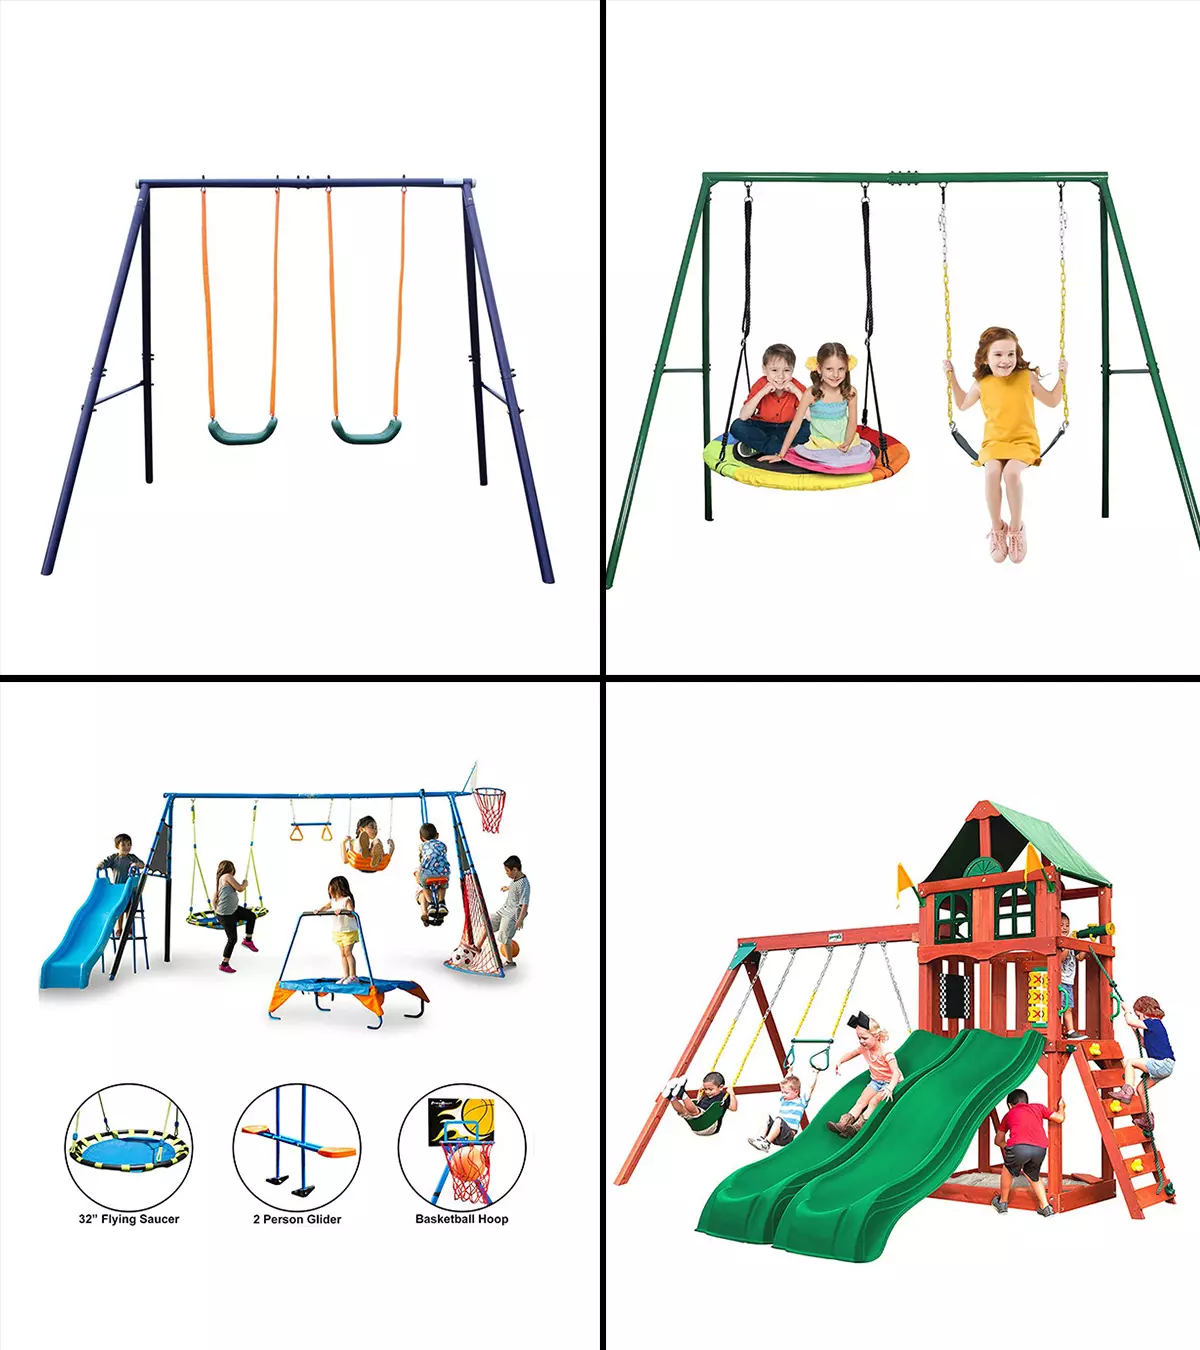 Bring some outdoor fun and adventure home with these awesome swing sets.